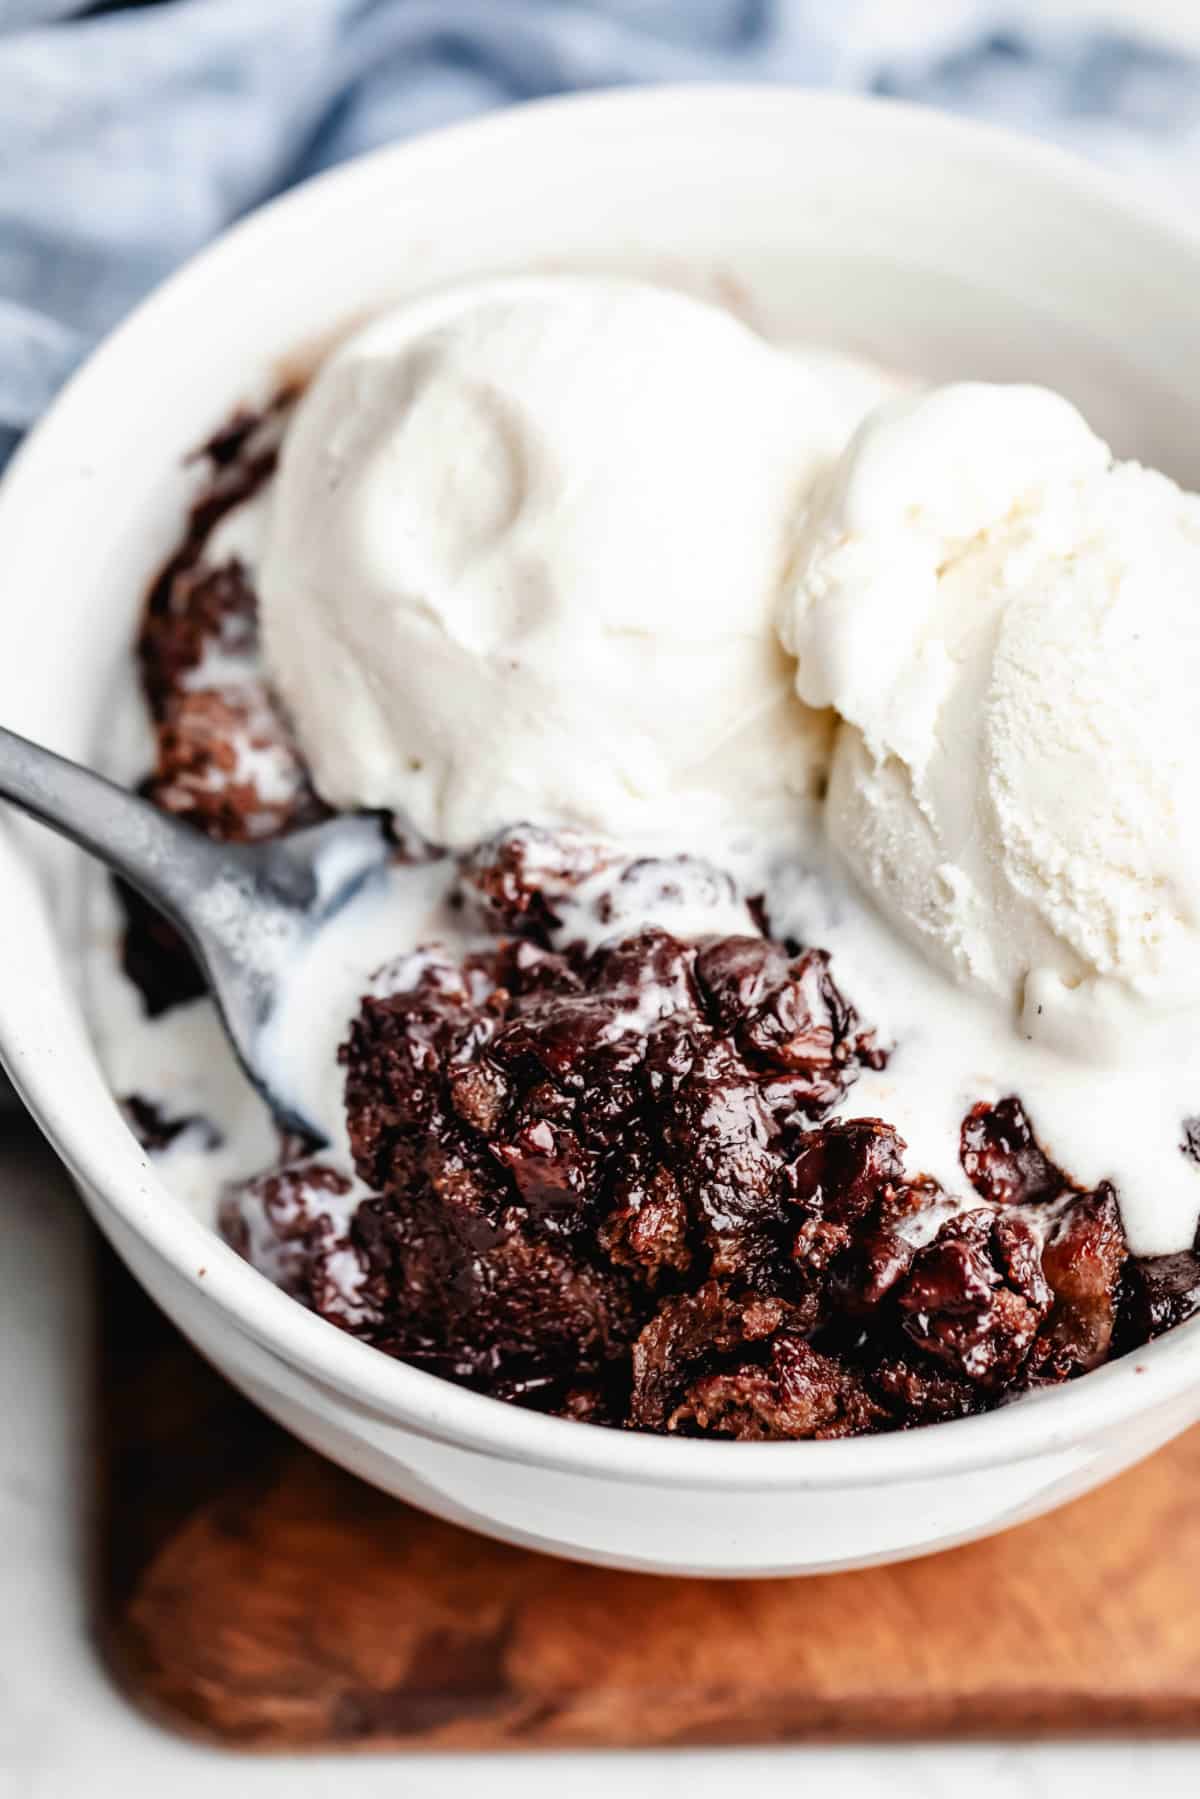 A spoon scooping up a bite of crock pot triple chocolate bread pudding.